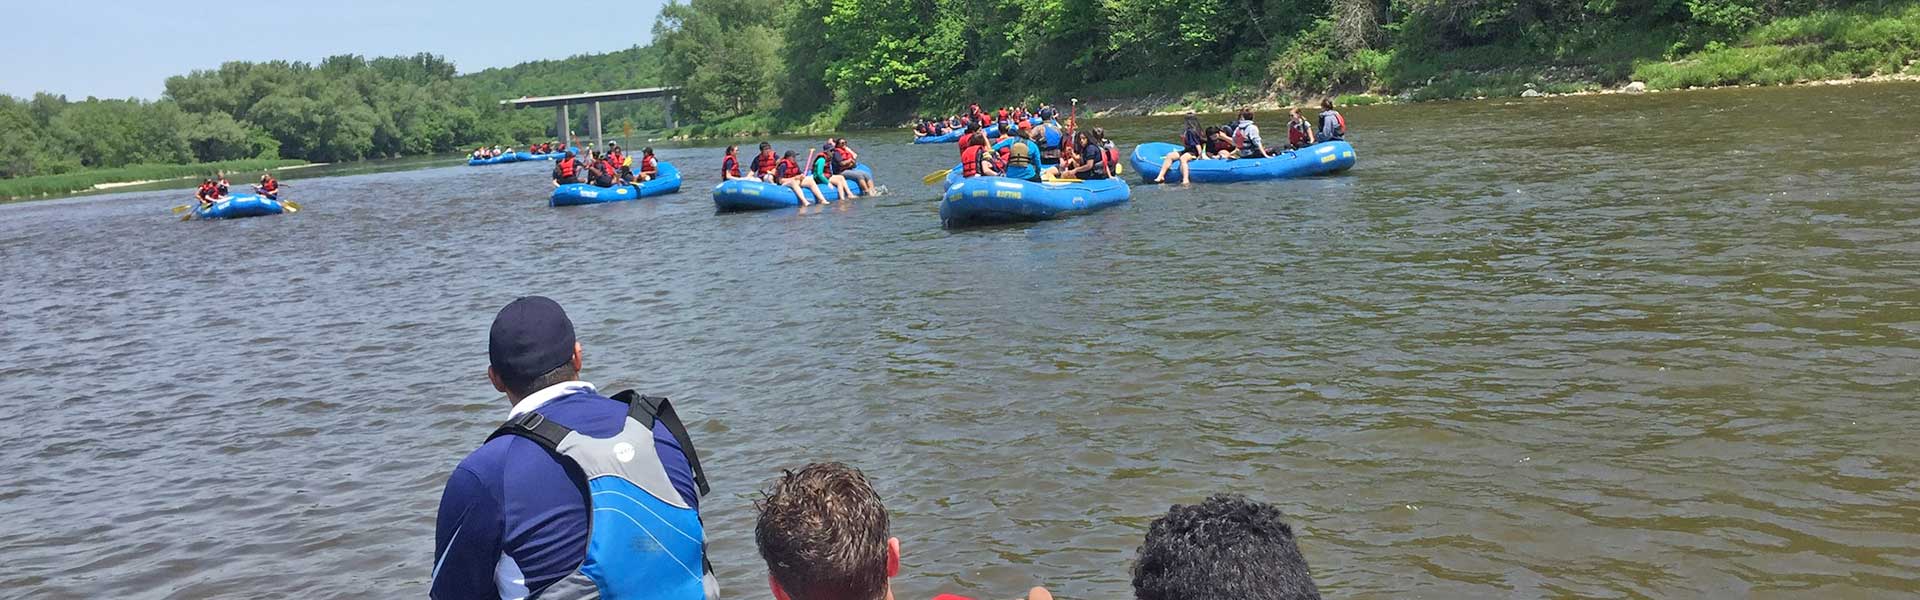 A large Grand River Rafting school group doing a floating classroom down the Grand River